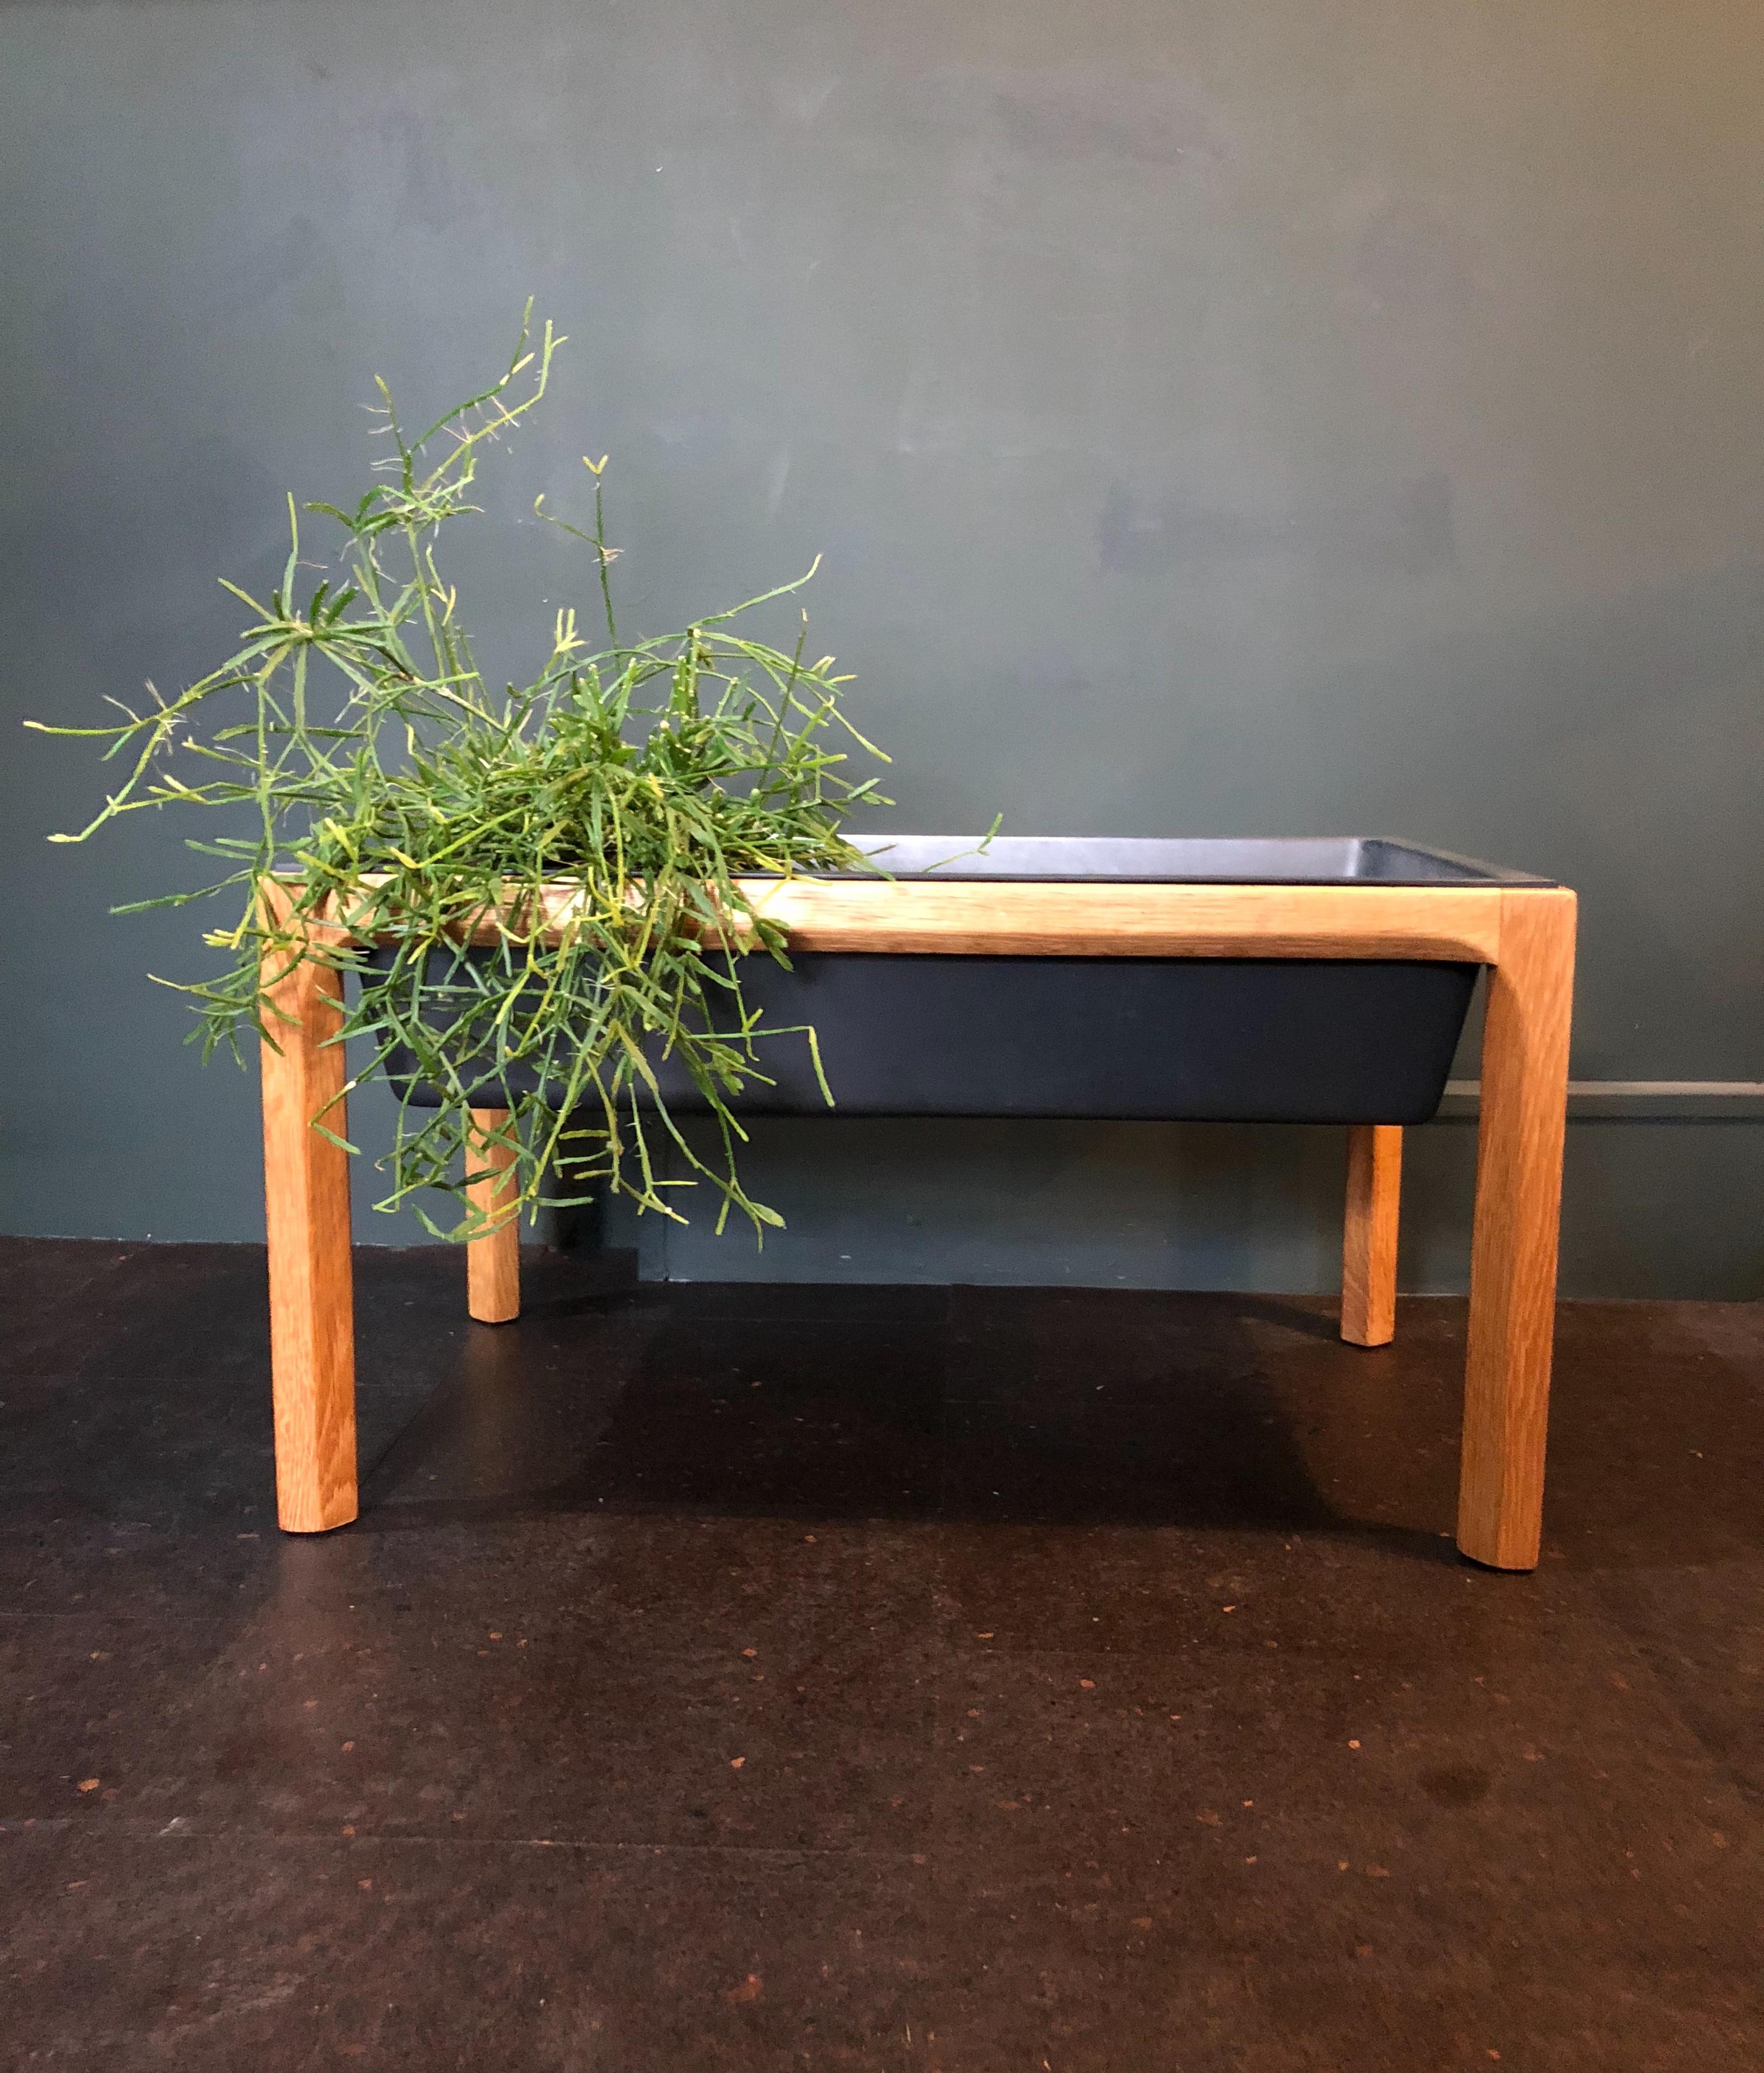 Super Minimalist design from Aksel Kjersgaard for this oak planter. Produced in Denmark during the 1960s. In superb condition throughout with re-oiling of the oak frame.